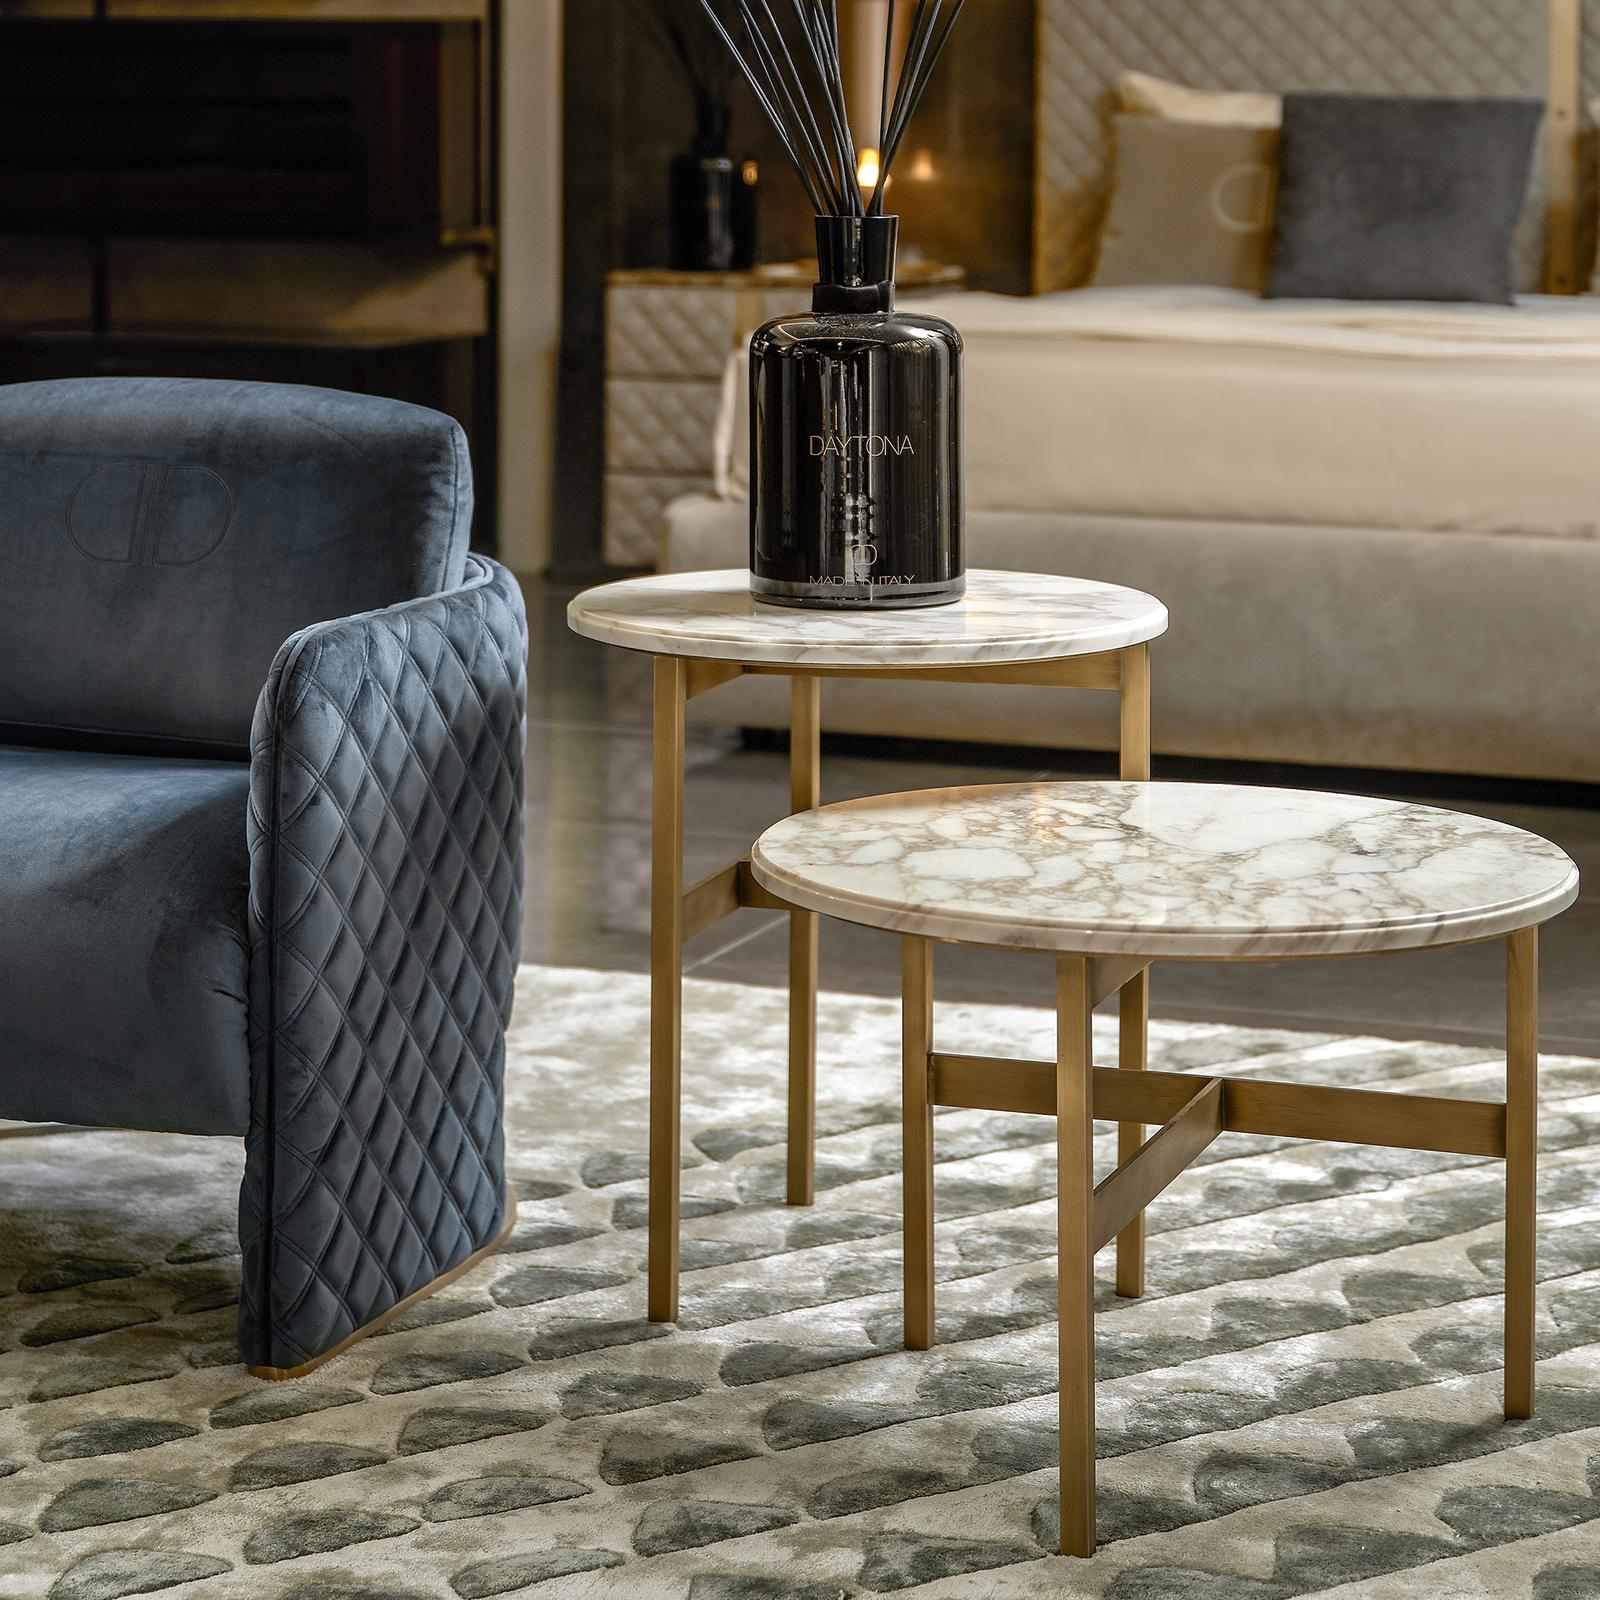 A clean and elegant design characterize this set of two Gaudi side tables. With legs finished in burnished brass or titanium and tops in marble, the stylish tables will compliment any contemporary or classic decor. This version features the striking